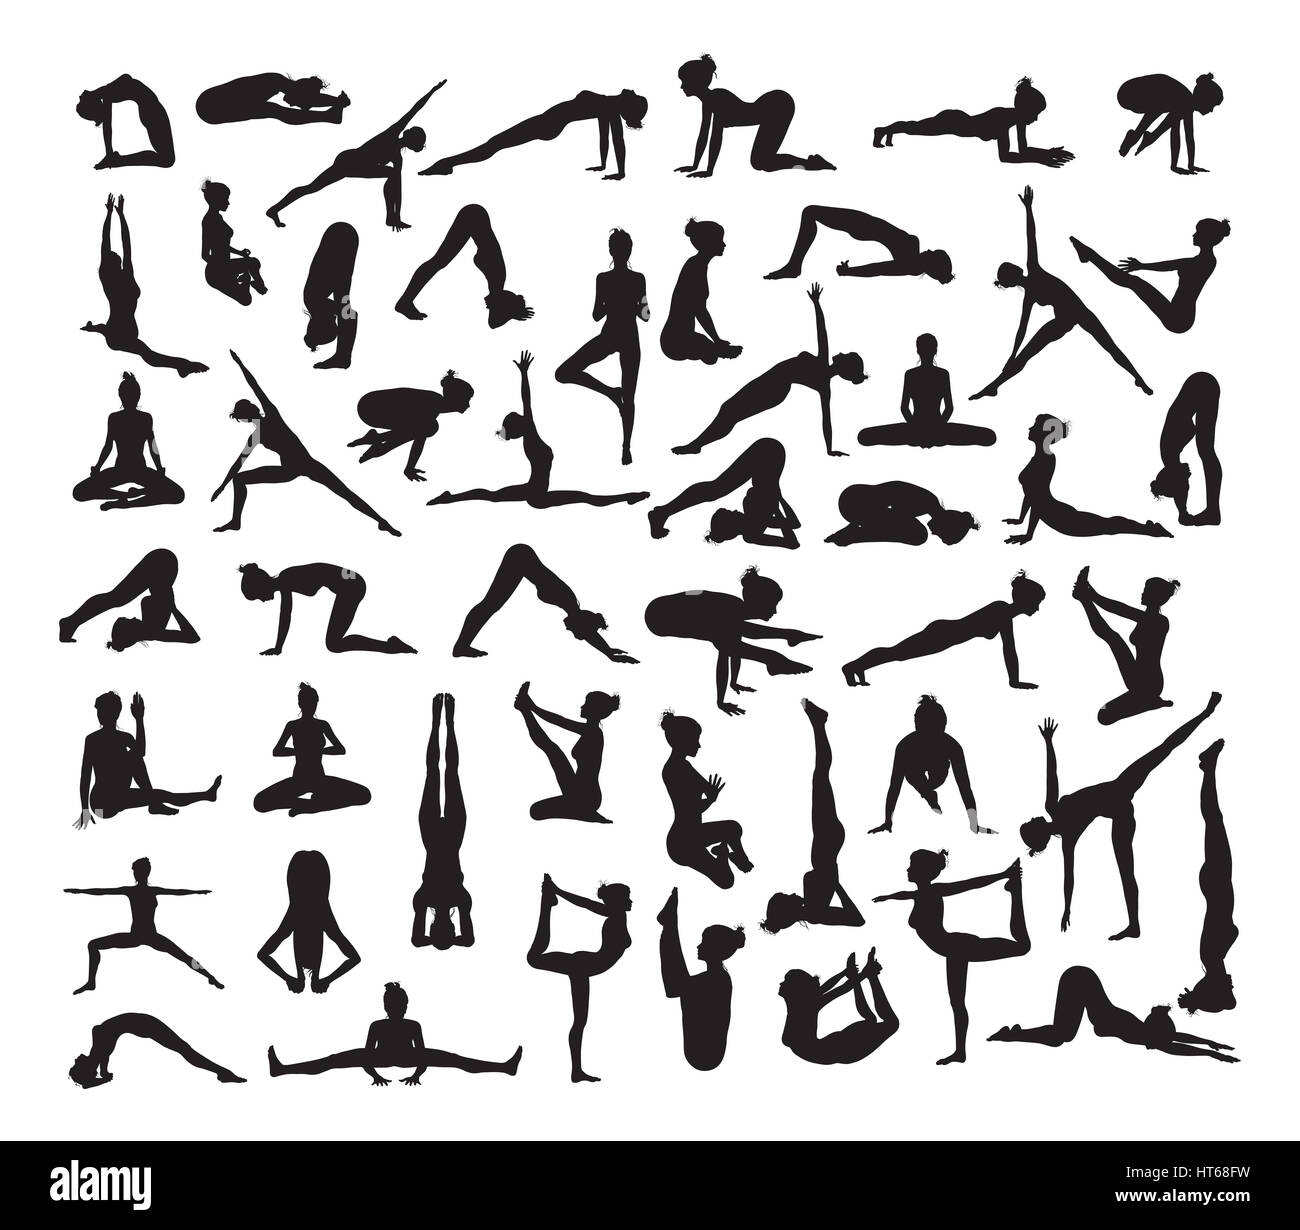 A set of detailed yoga poses and postures silhouettes Stock Photo